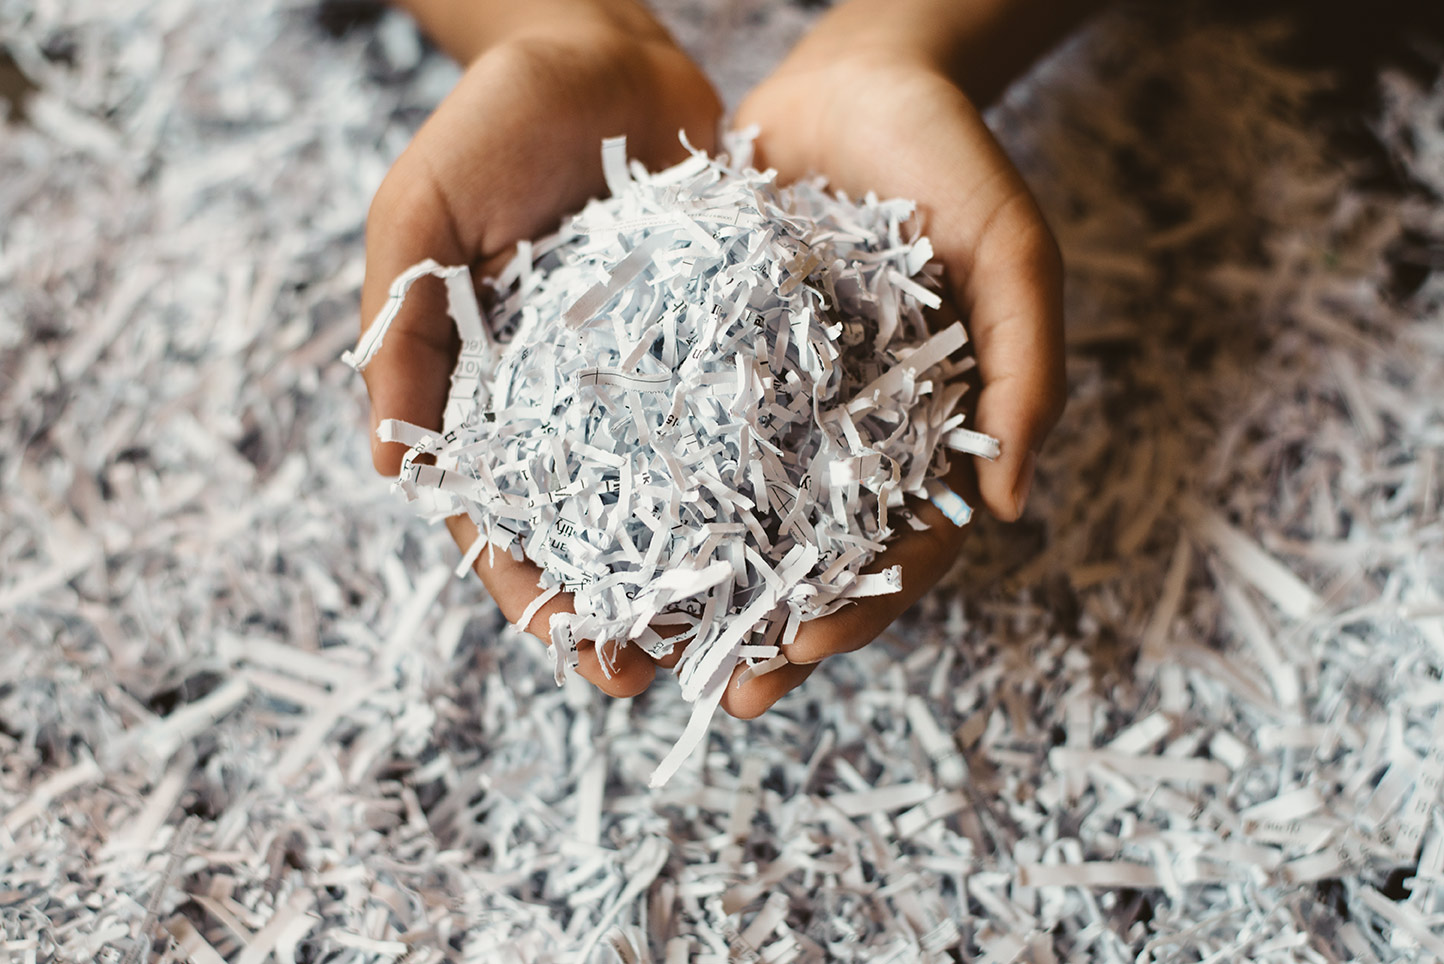 Shredded printer paper ready for recycling.